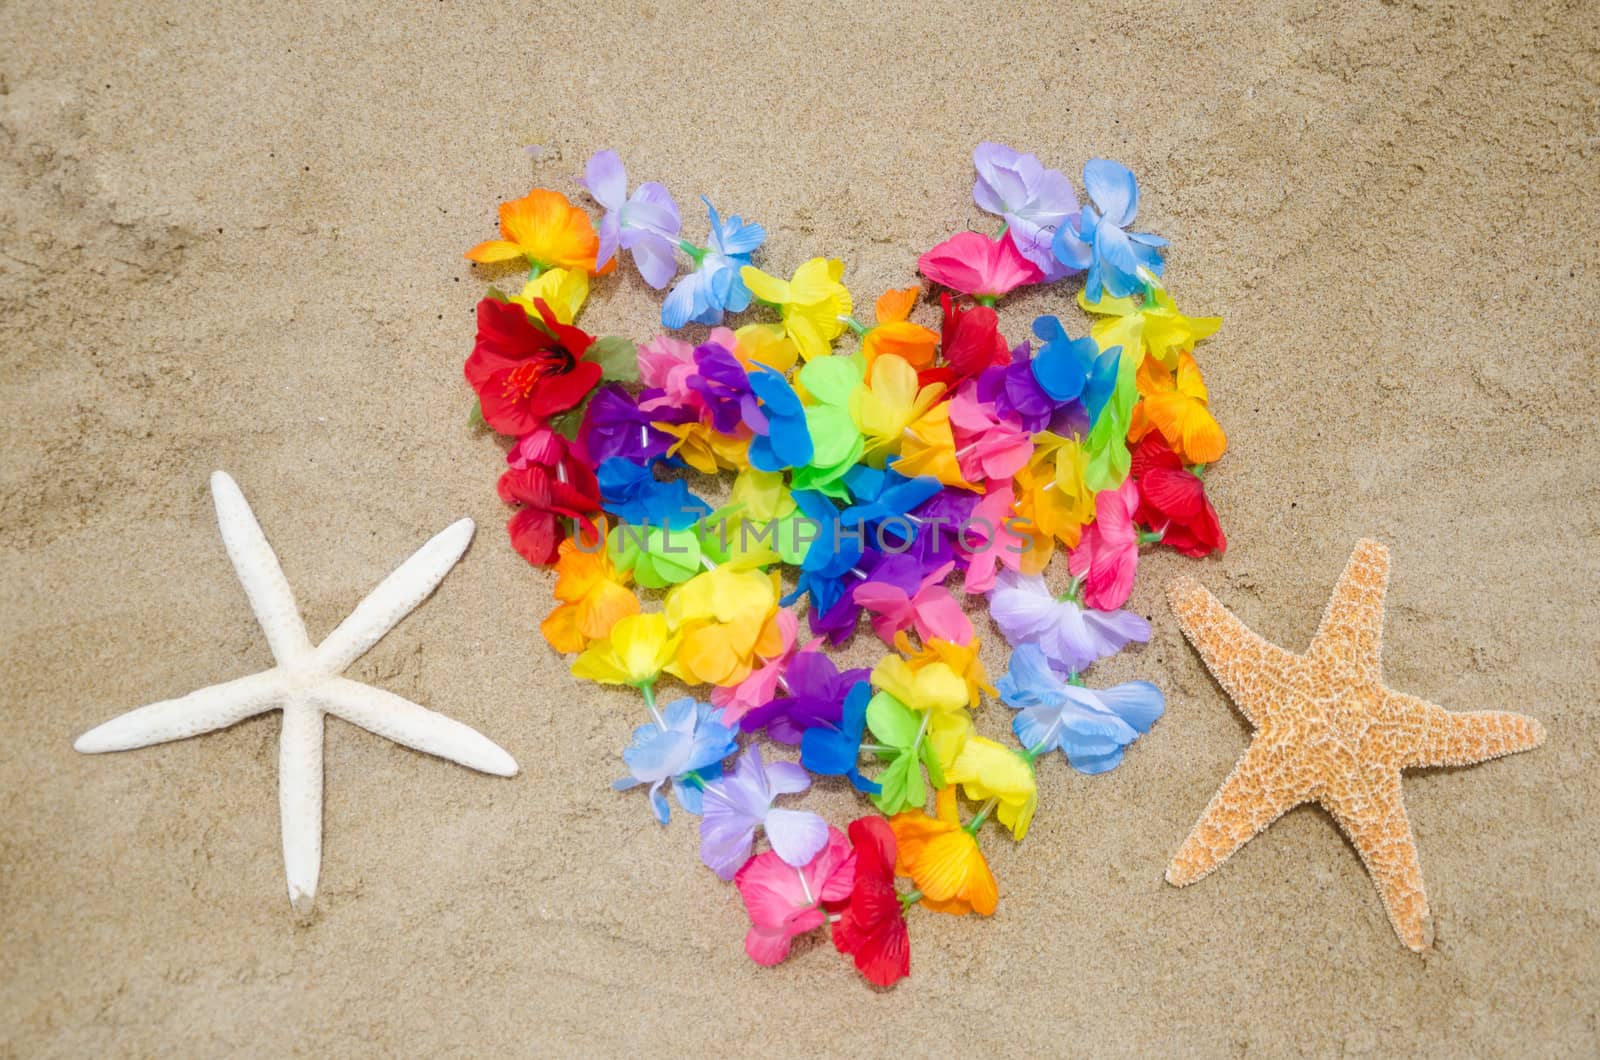 Heart shape and starfishes on the beach by EllenSmile